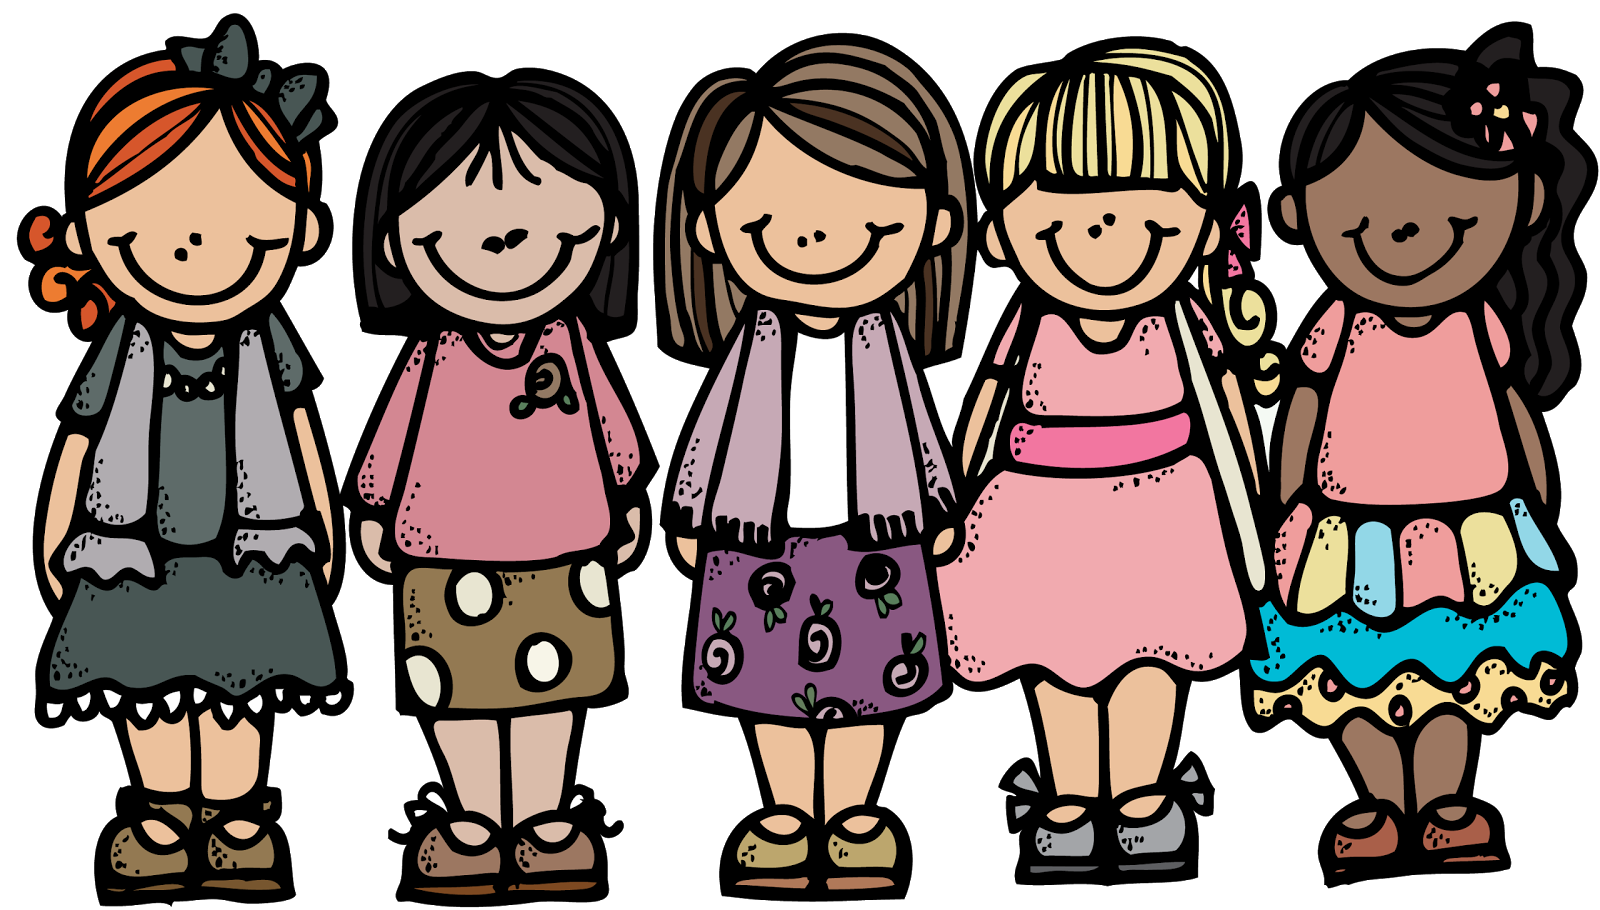  collection of free. Lds clipart friend